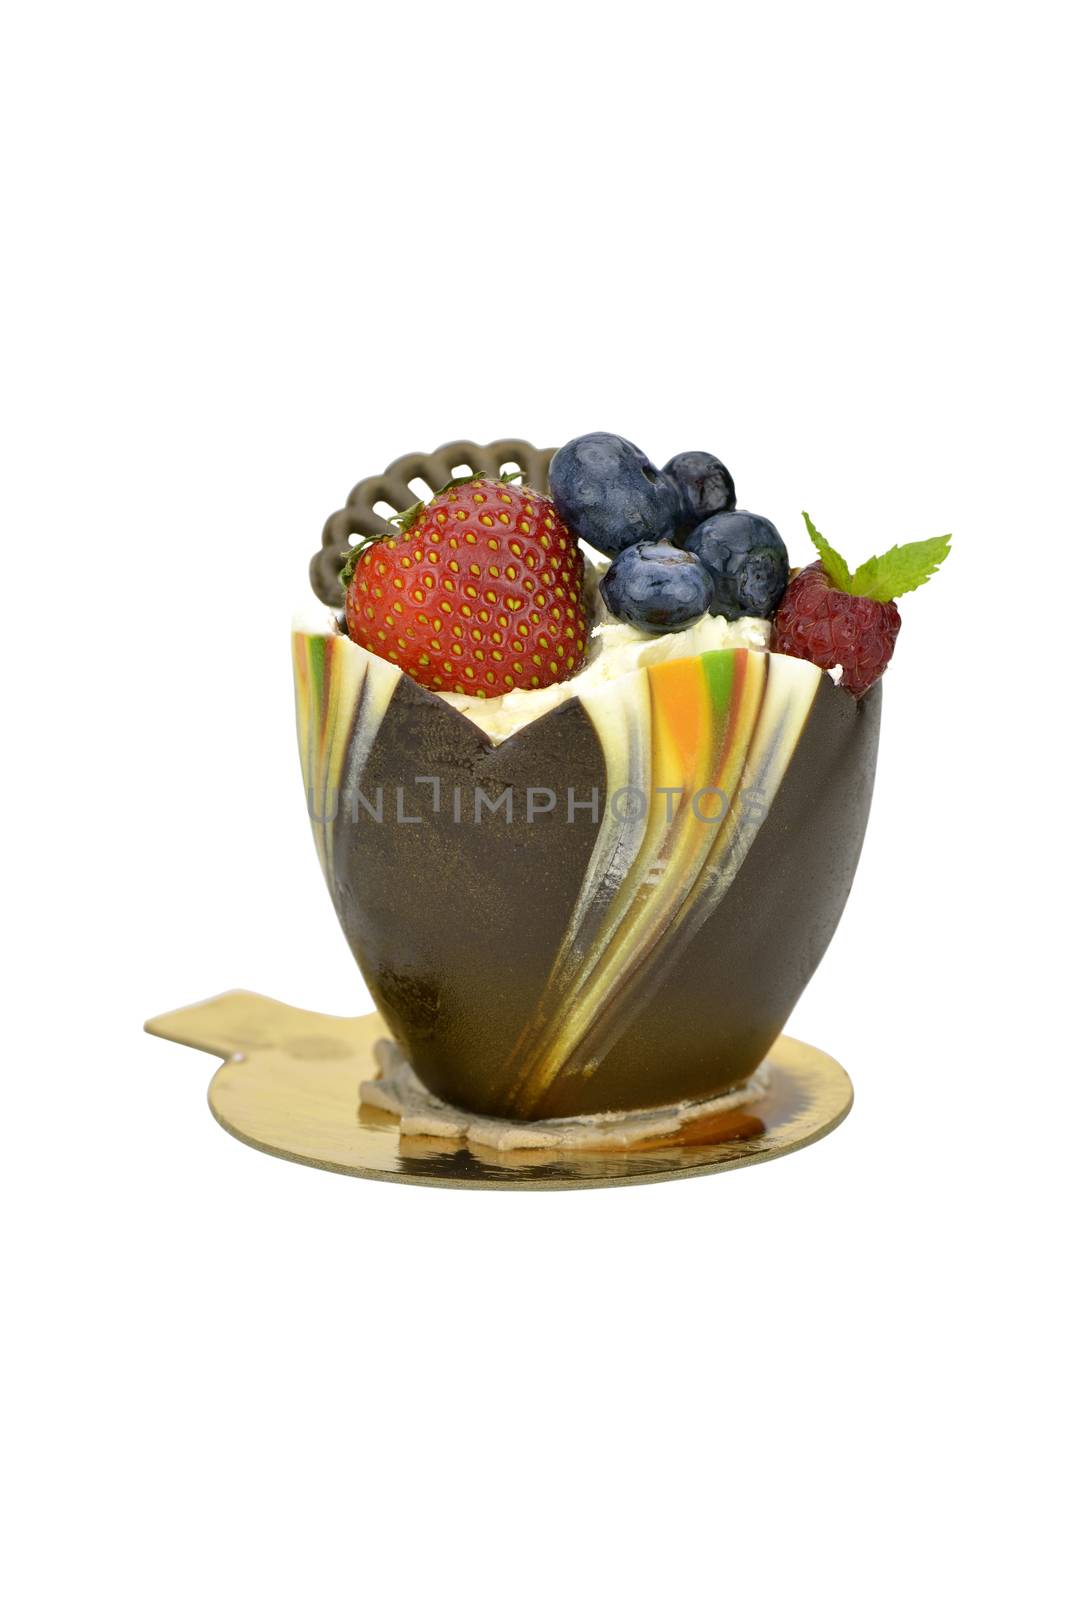 Chocolate cupcake with fruits by Hbak